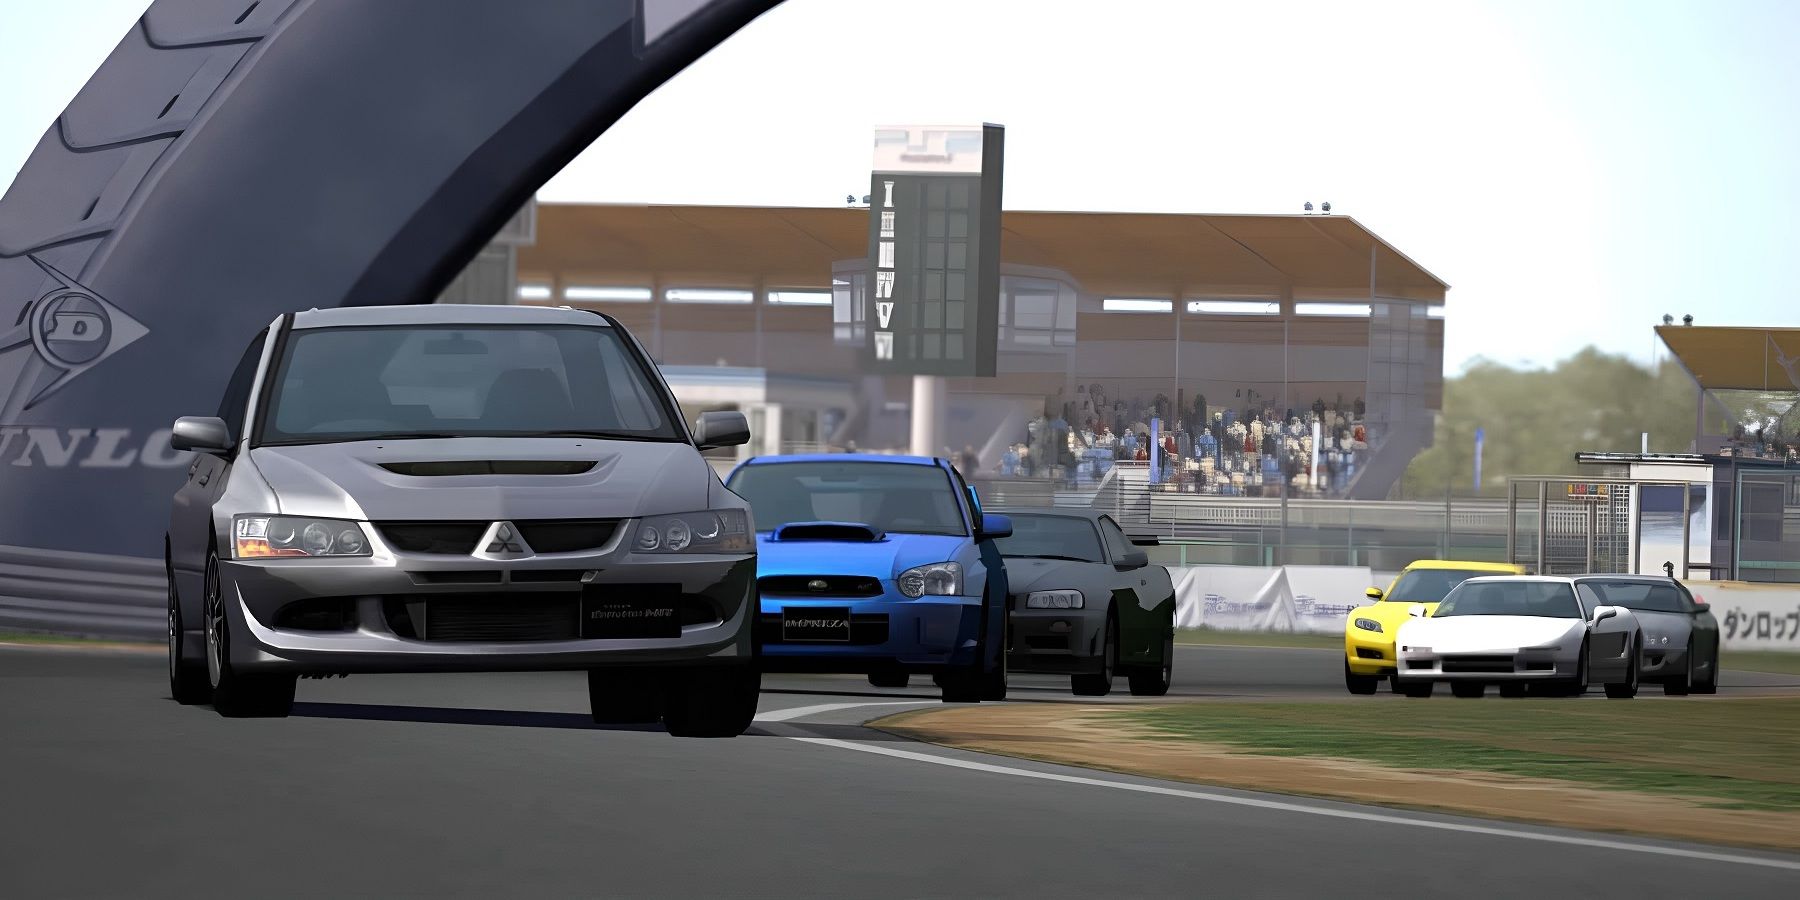 Cheats found in GRAN TURISMO 4 after almost 20 YEARS 